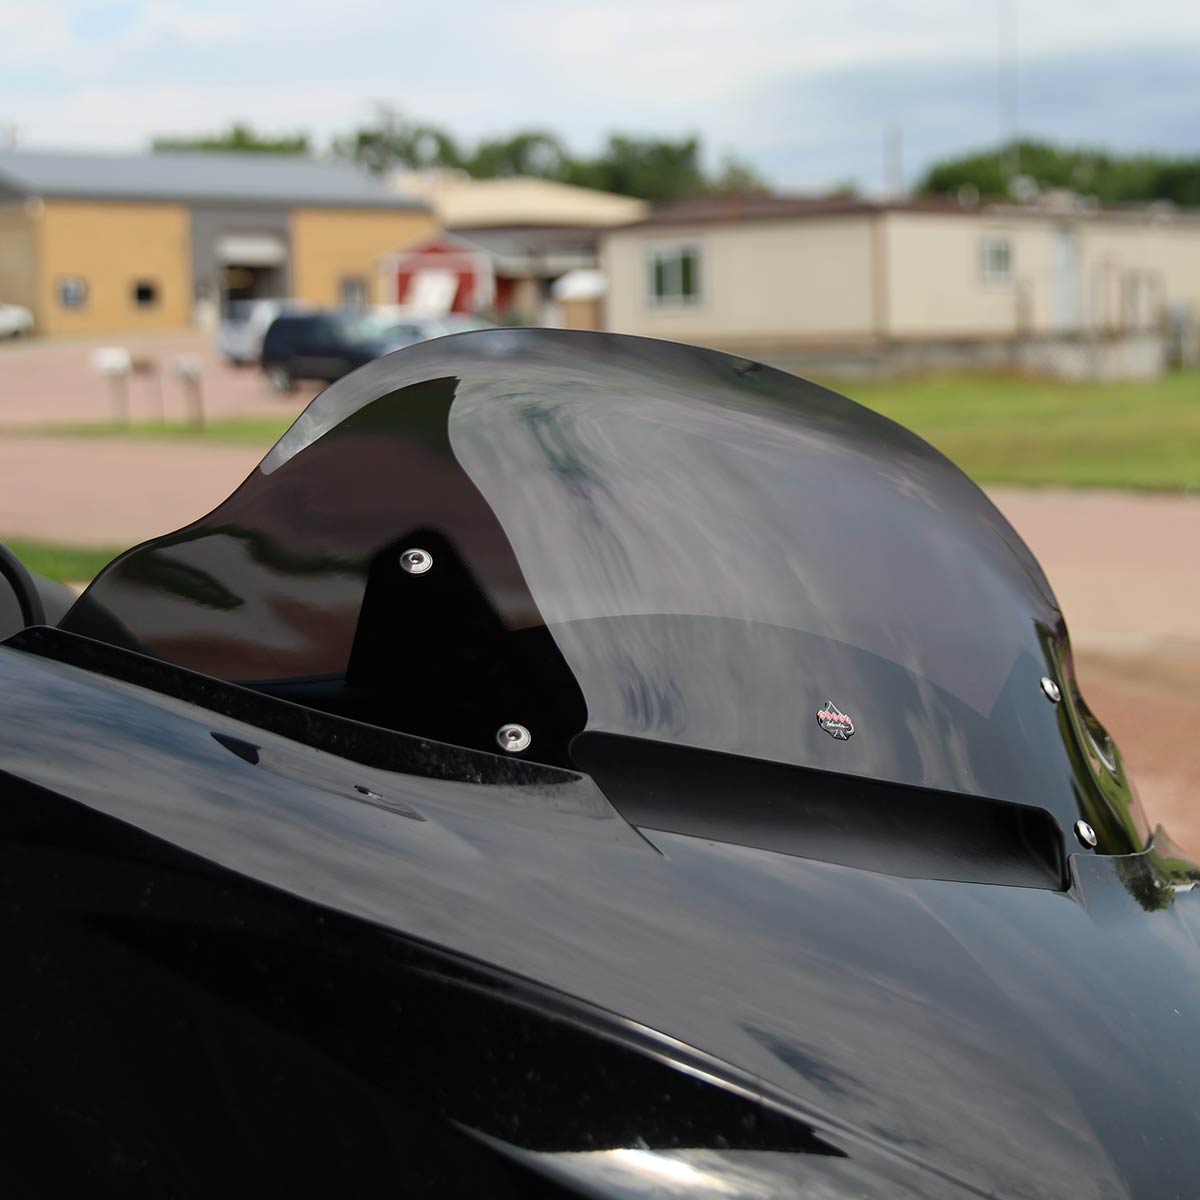 6.5" Flare™ Windshield For Victory® Cross Country motorcycle models(6.5" Dark Smoke)